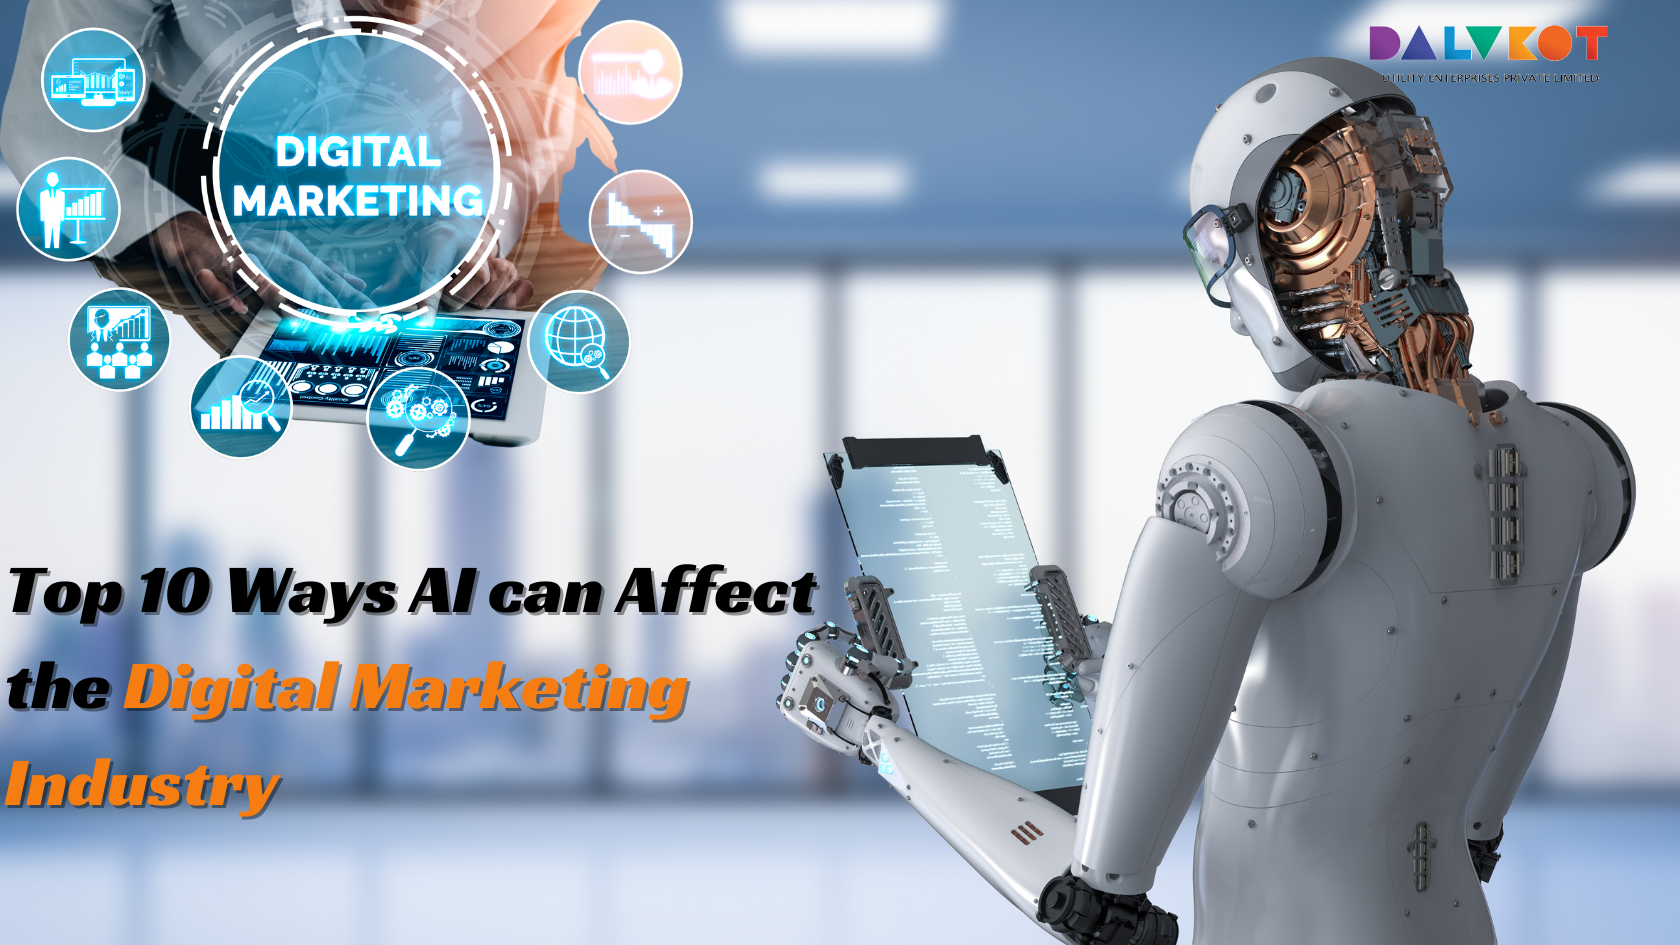 What are the top 10 Ways AI can Affect the Digital Marketing Industry